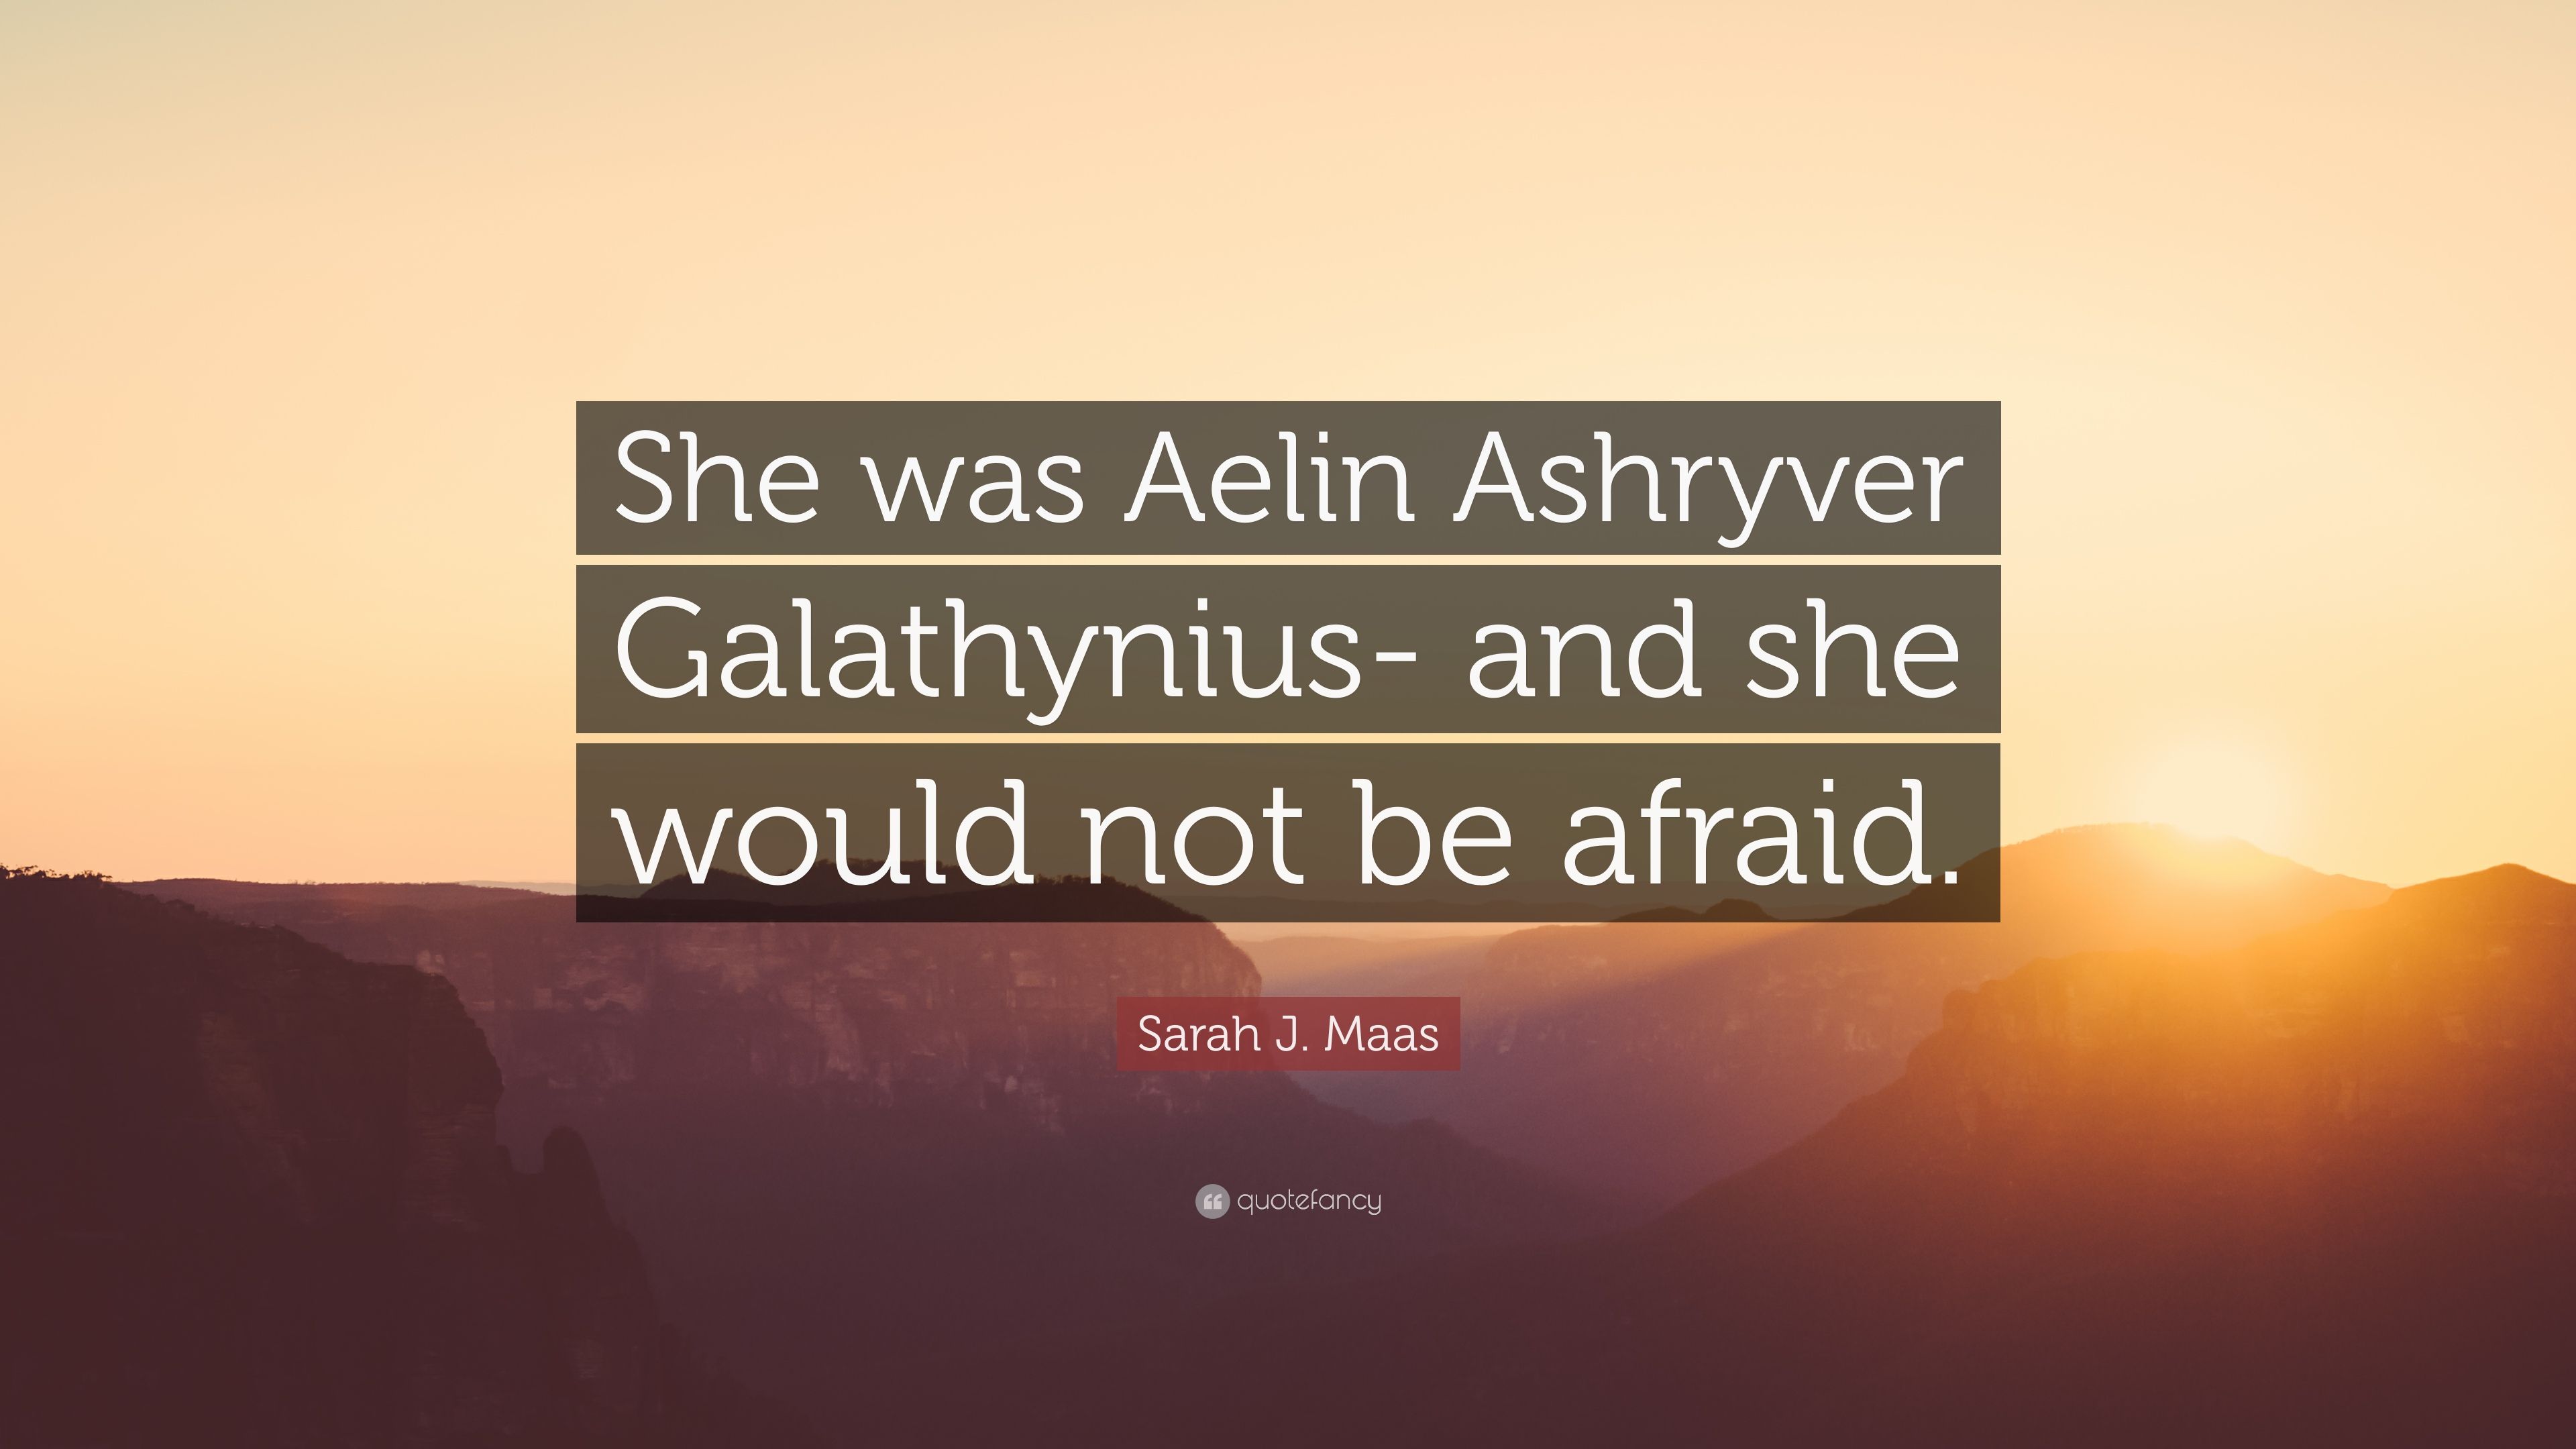 Sarah J. Maas Quote: “She was Aelin Ashryver Galathynius- and she would not be afraid.” (9 wallpaper)